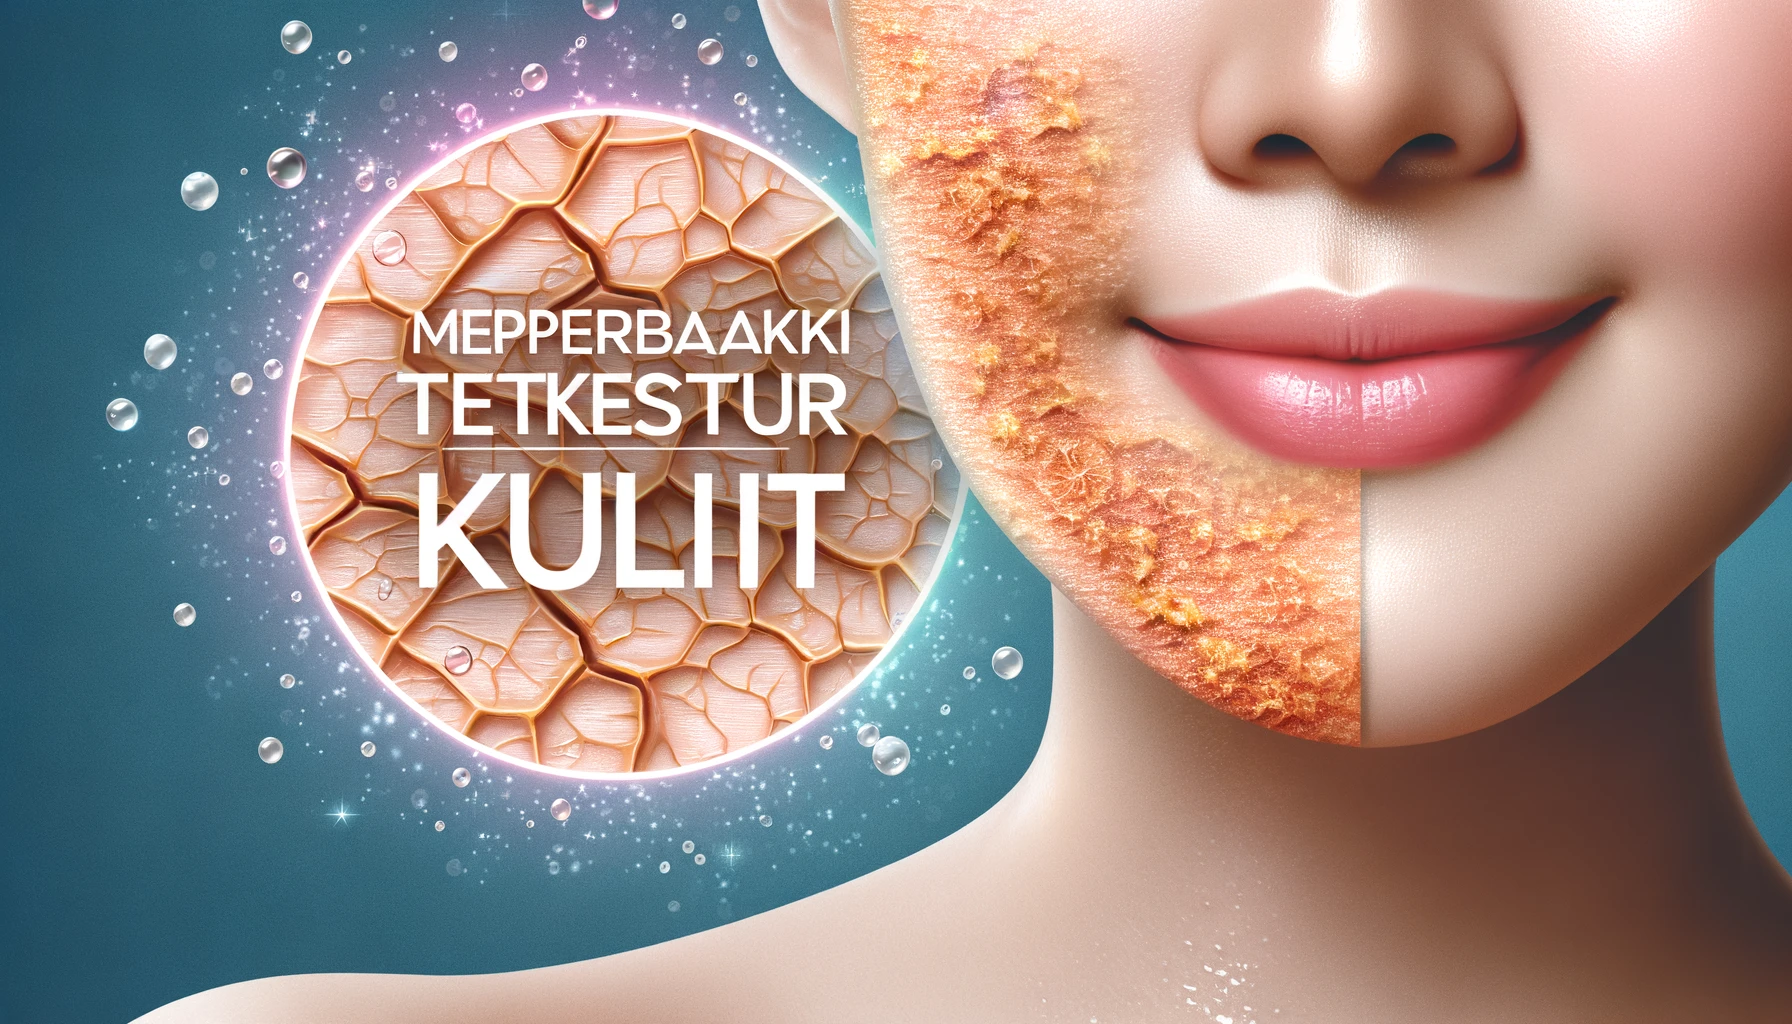 A close-up image of healthy, radiant skin texture illustrating the concept of improved skin texture, with the caption 'Memperbaiki Tekstur Kulit' in an elegant font. The image should convey a sense of freshness, vitality, and the benefits of natural skincare, in a realistic, non-cartoon style. Vivid and full-color.